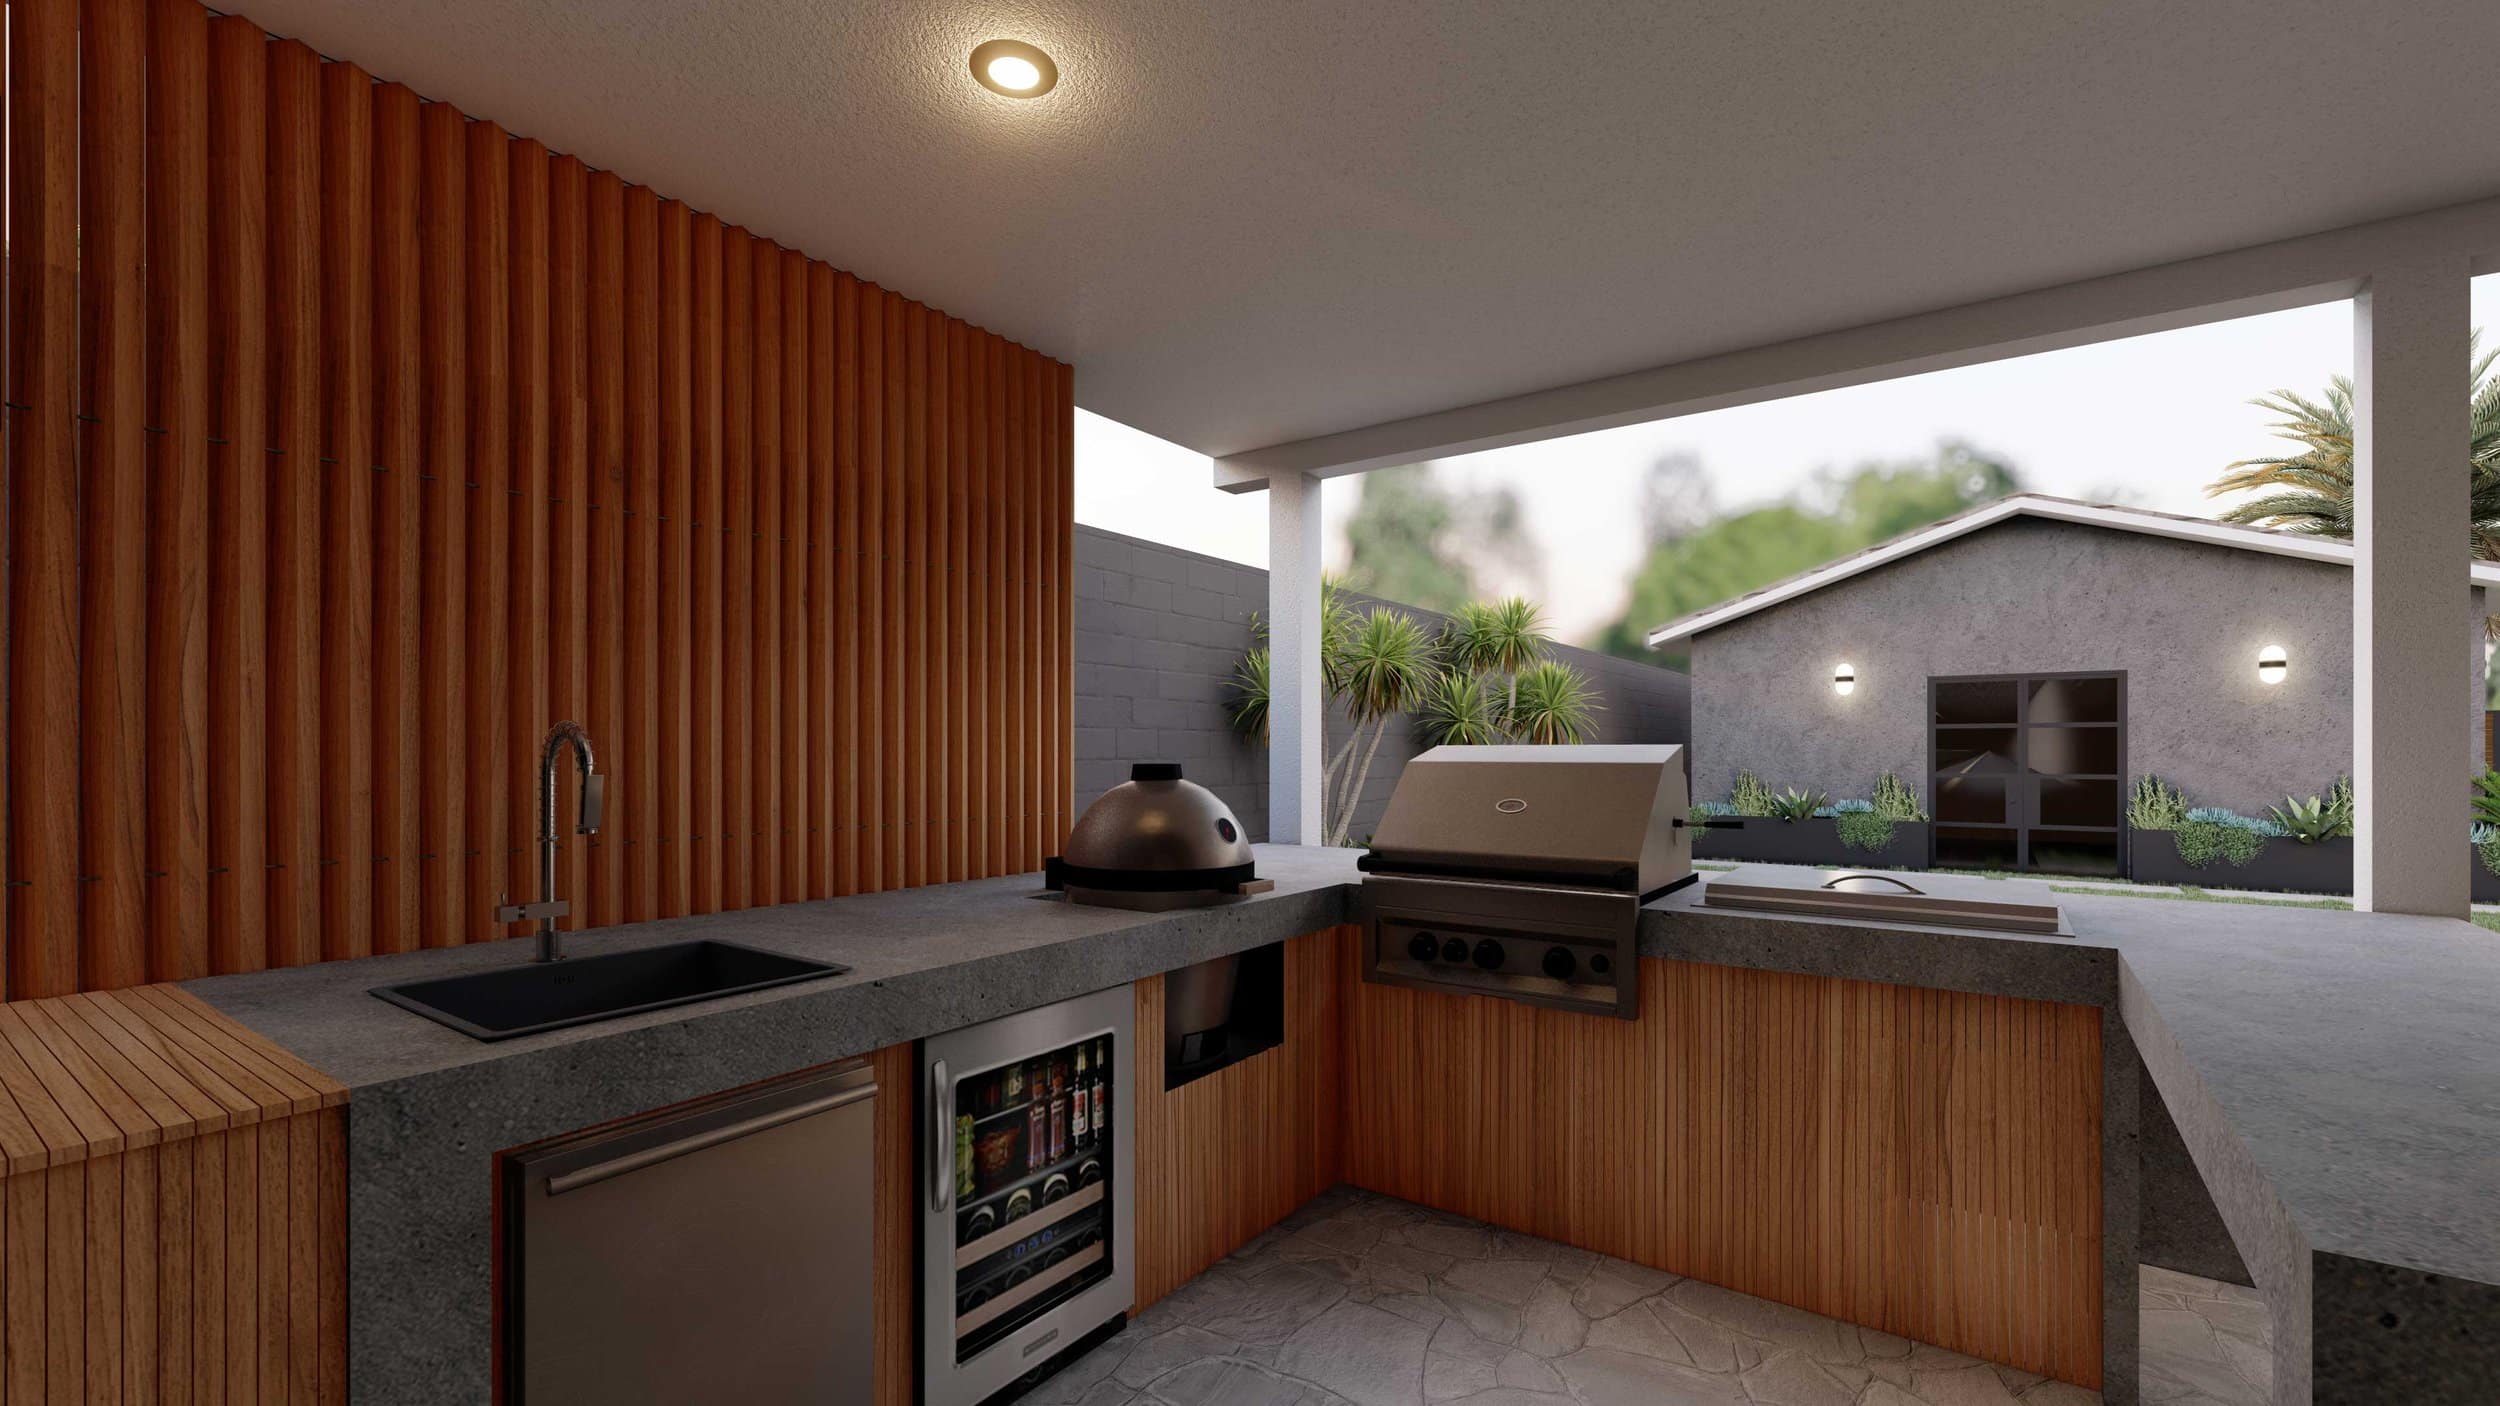 L-shaped outdoor kitchen with smoker, concrete countertop, and wooden facade